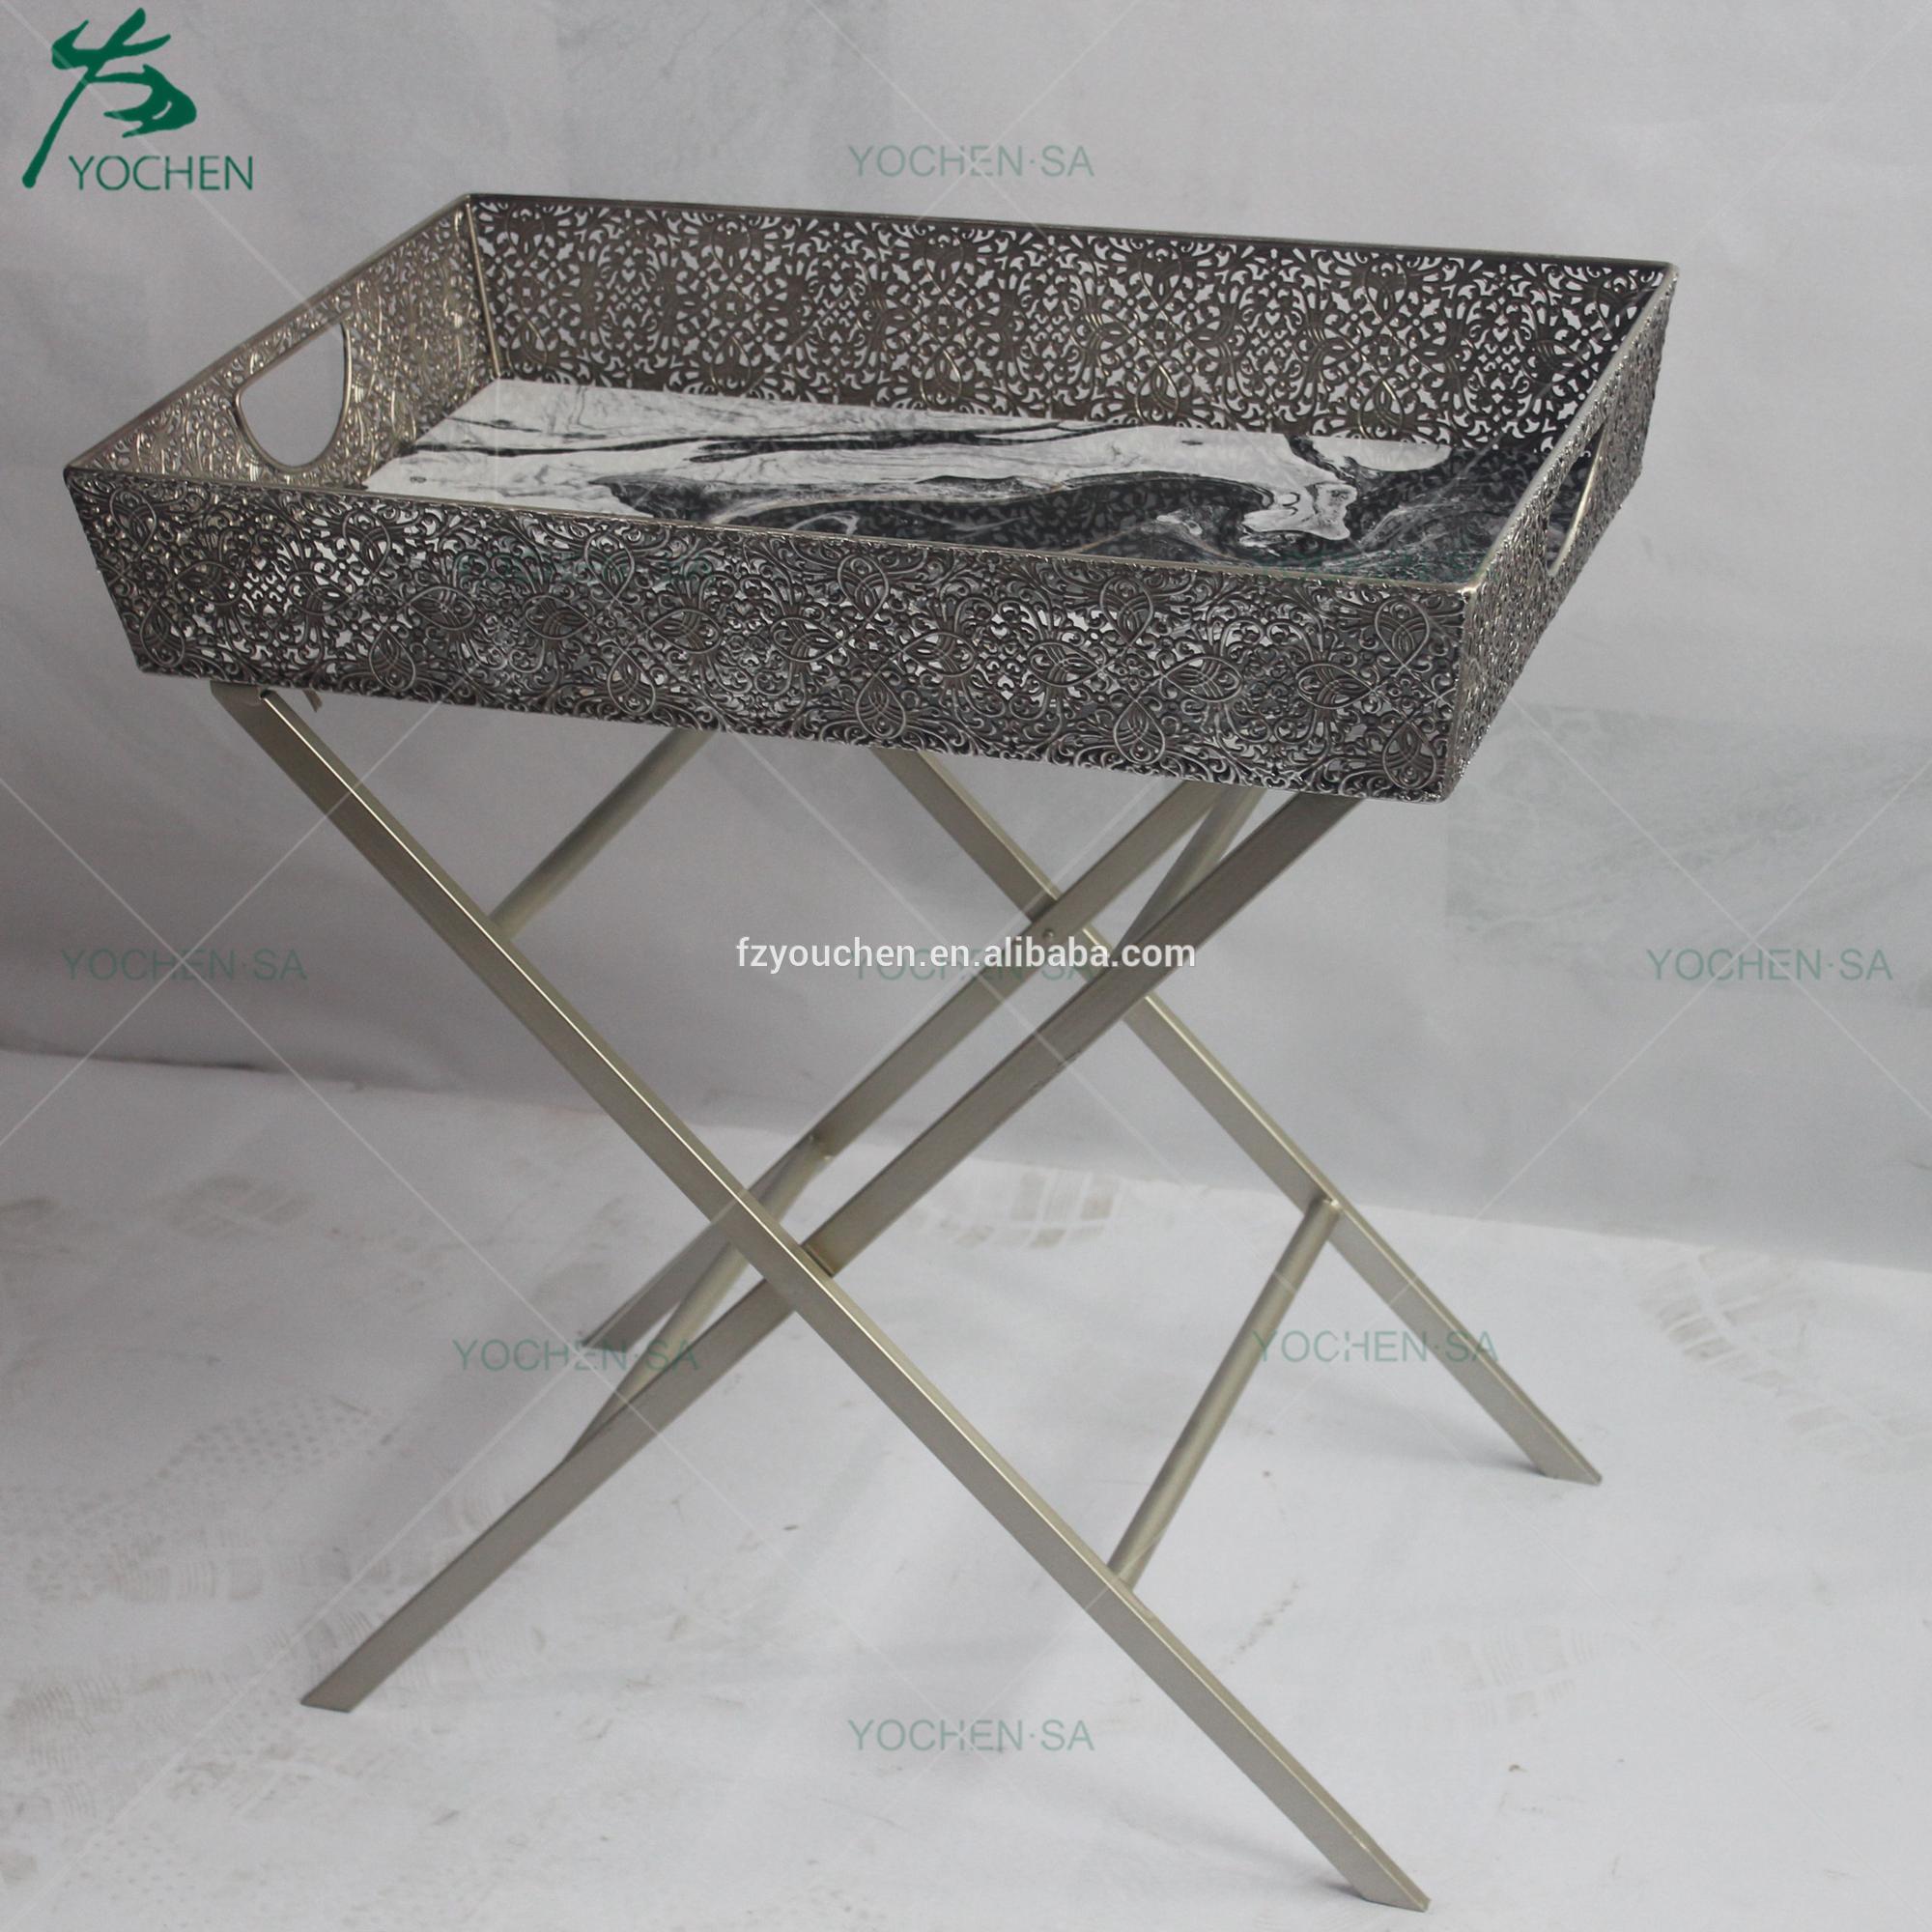 Faux Marble Top Metal Folding Tray Table